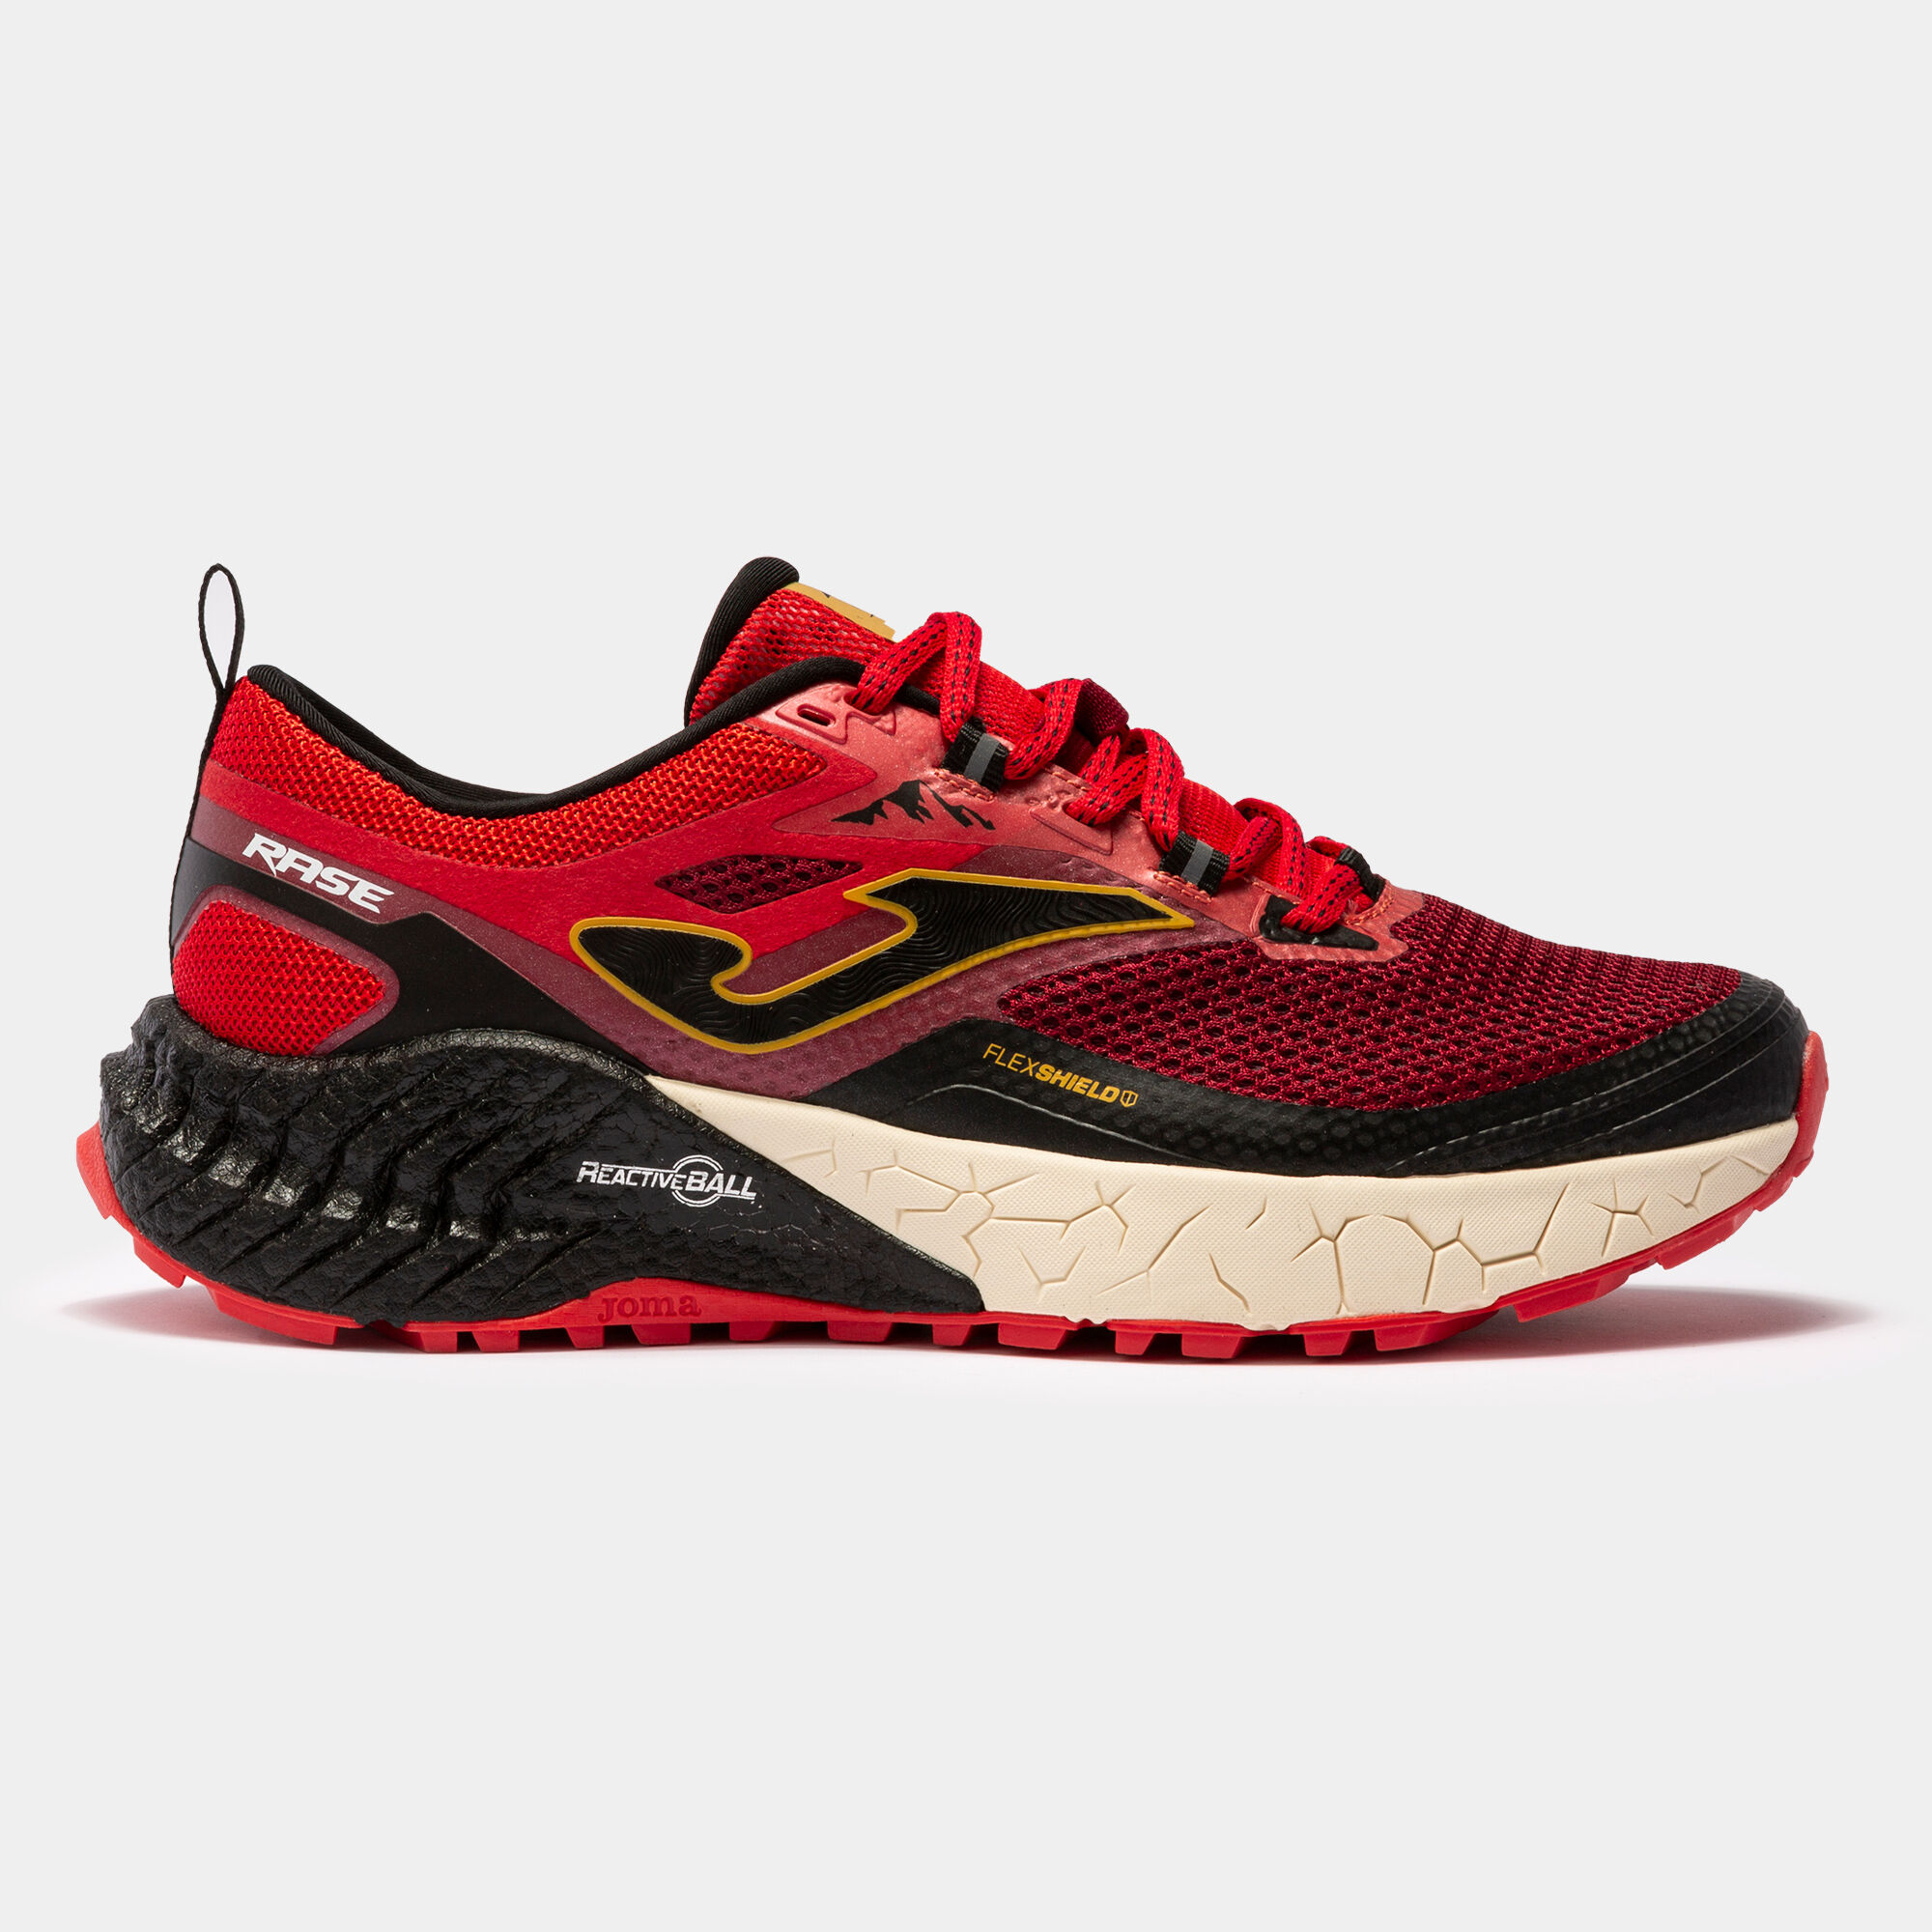 CHAUSSURES TRAIL RUNNING RASE 22 HOMME BORDEAUX ROUGE